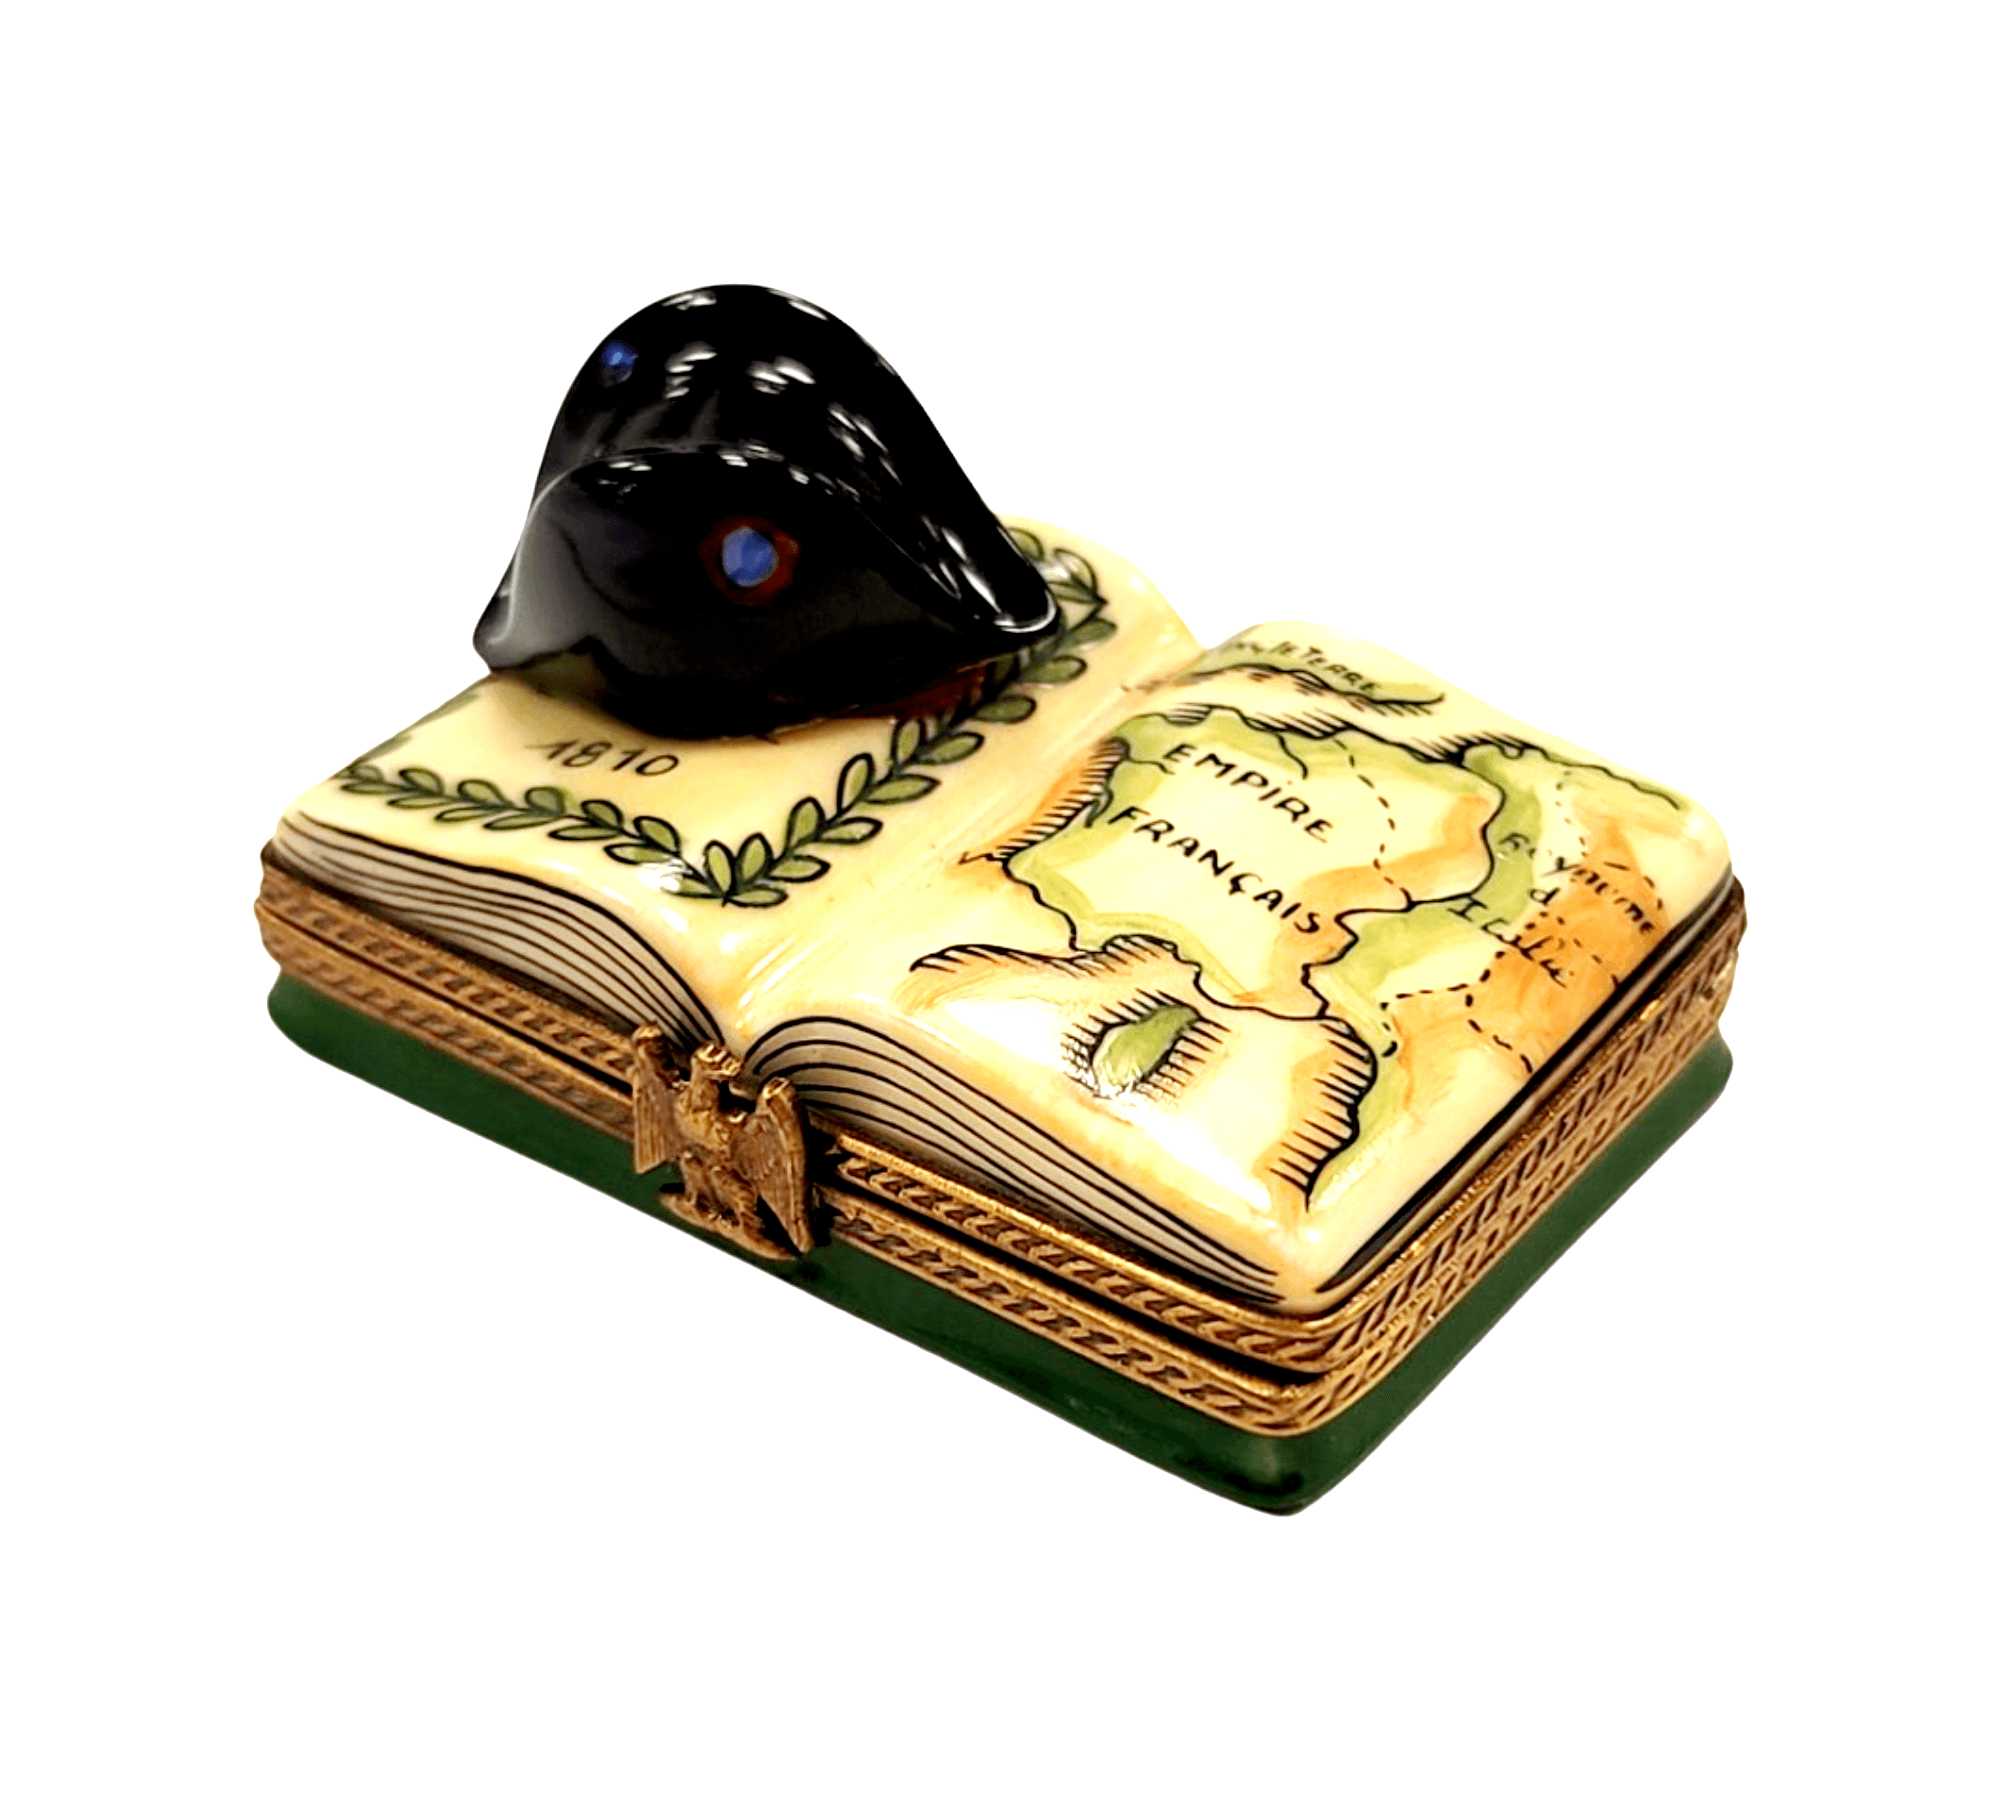 Napolean French Military Hat on Book Map Porcelain Limoges Trinket Box